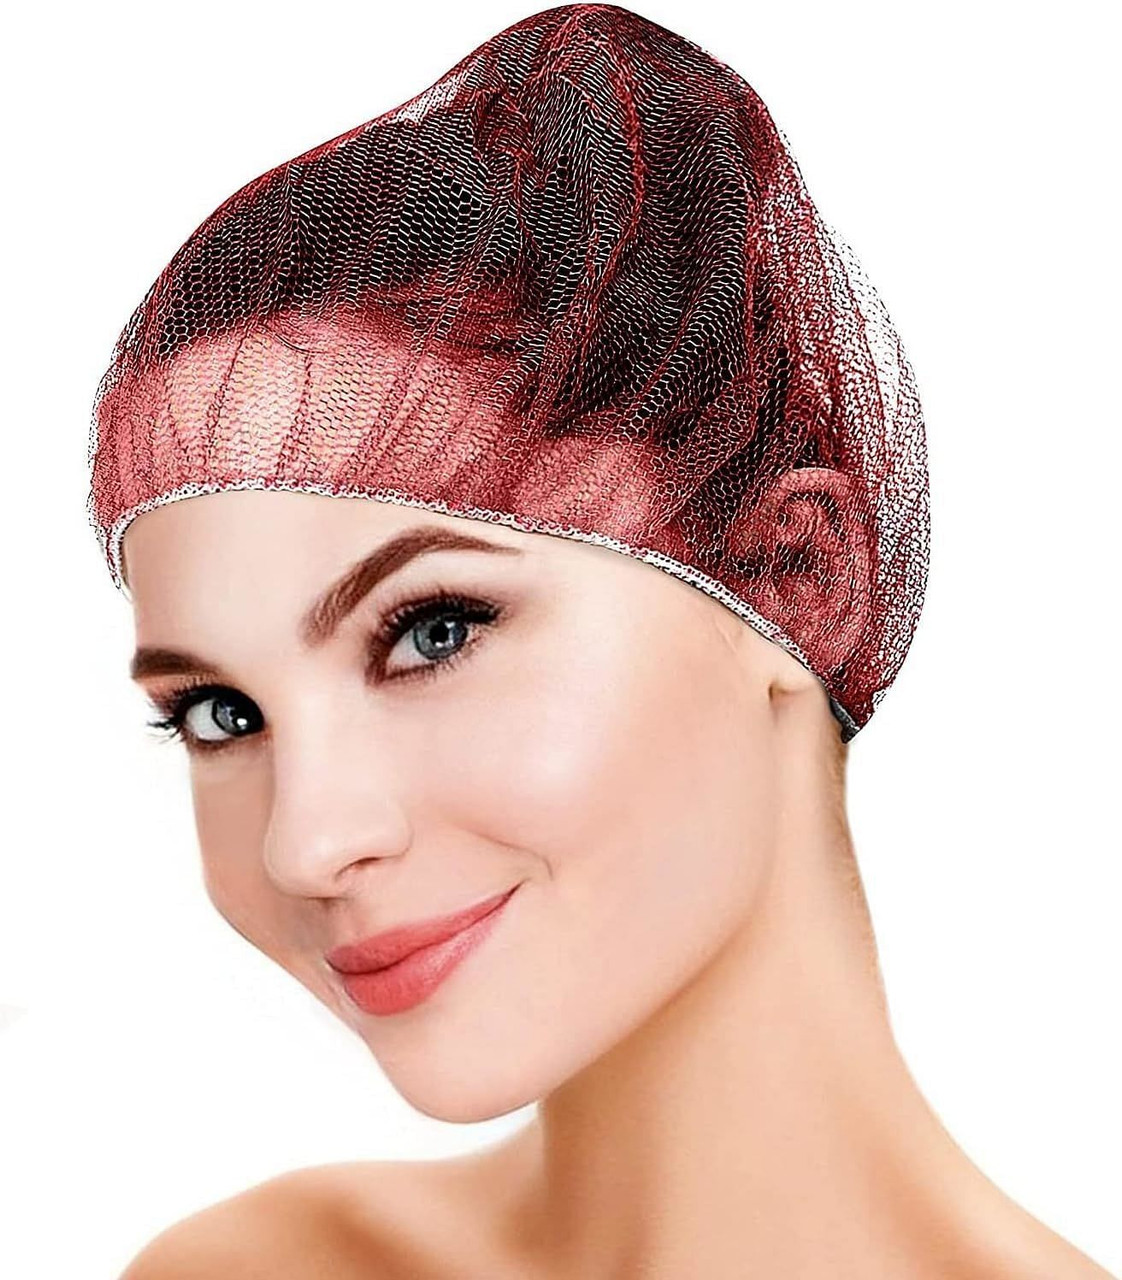 Disposable Hair Net 28 Inch. Pack of 1000 Red Nylon Bouffant Hair Nets Food Service. Soft Durable D